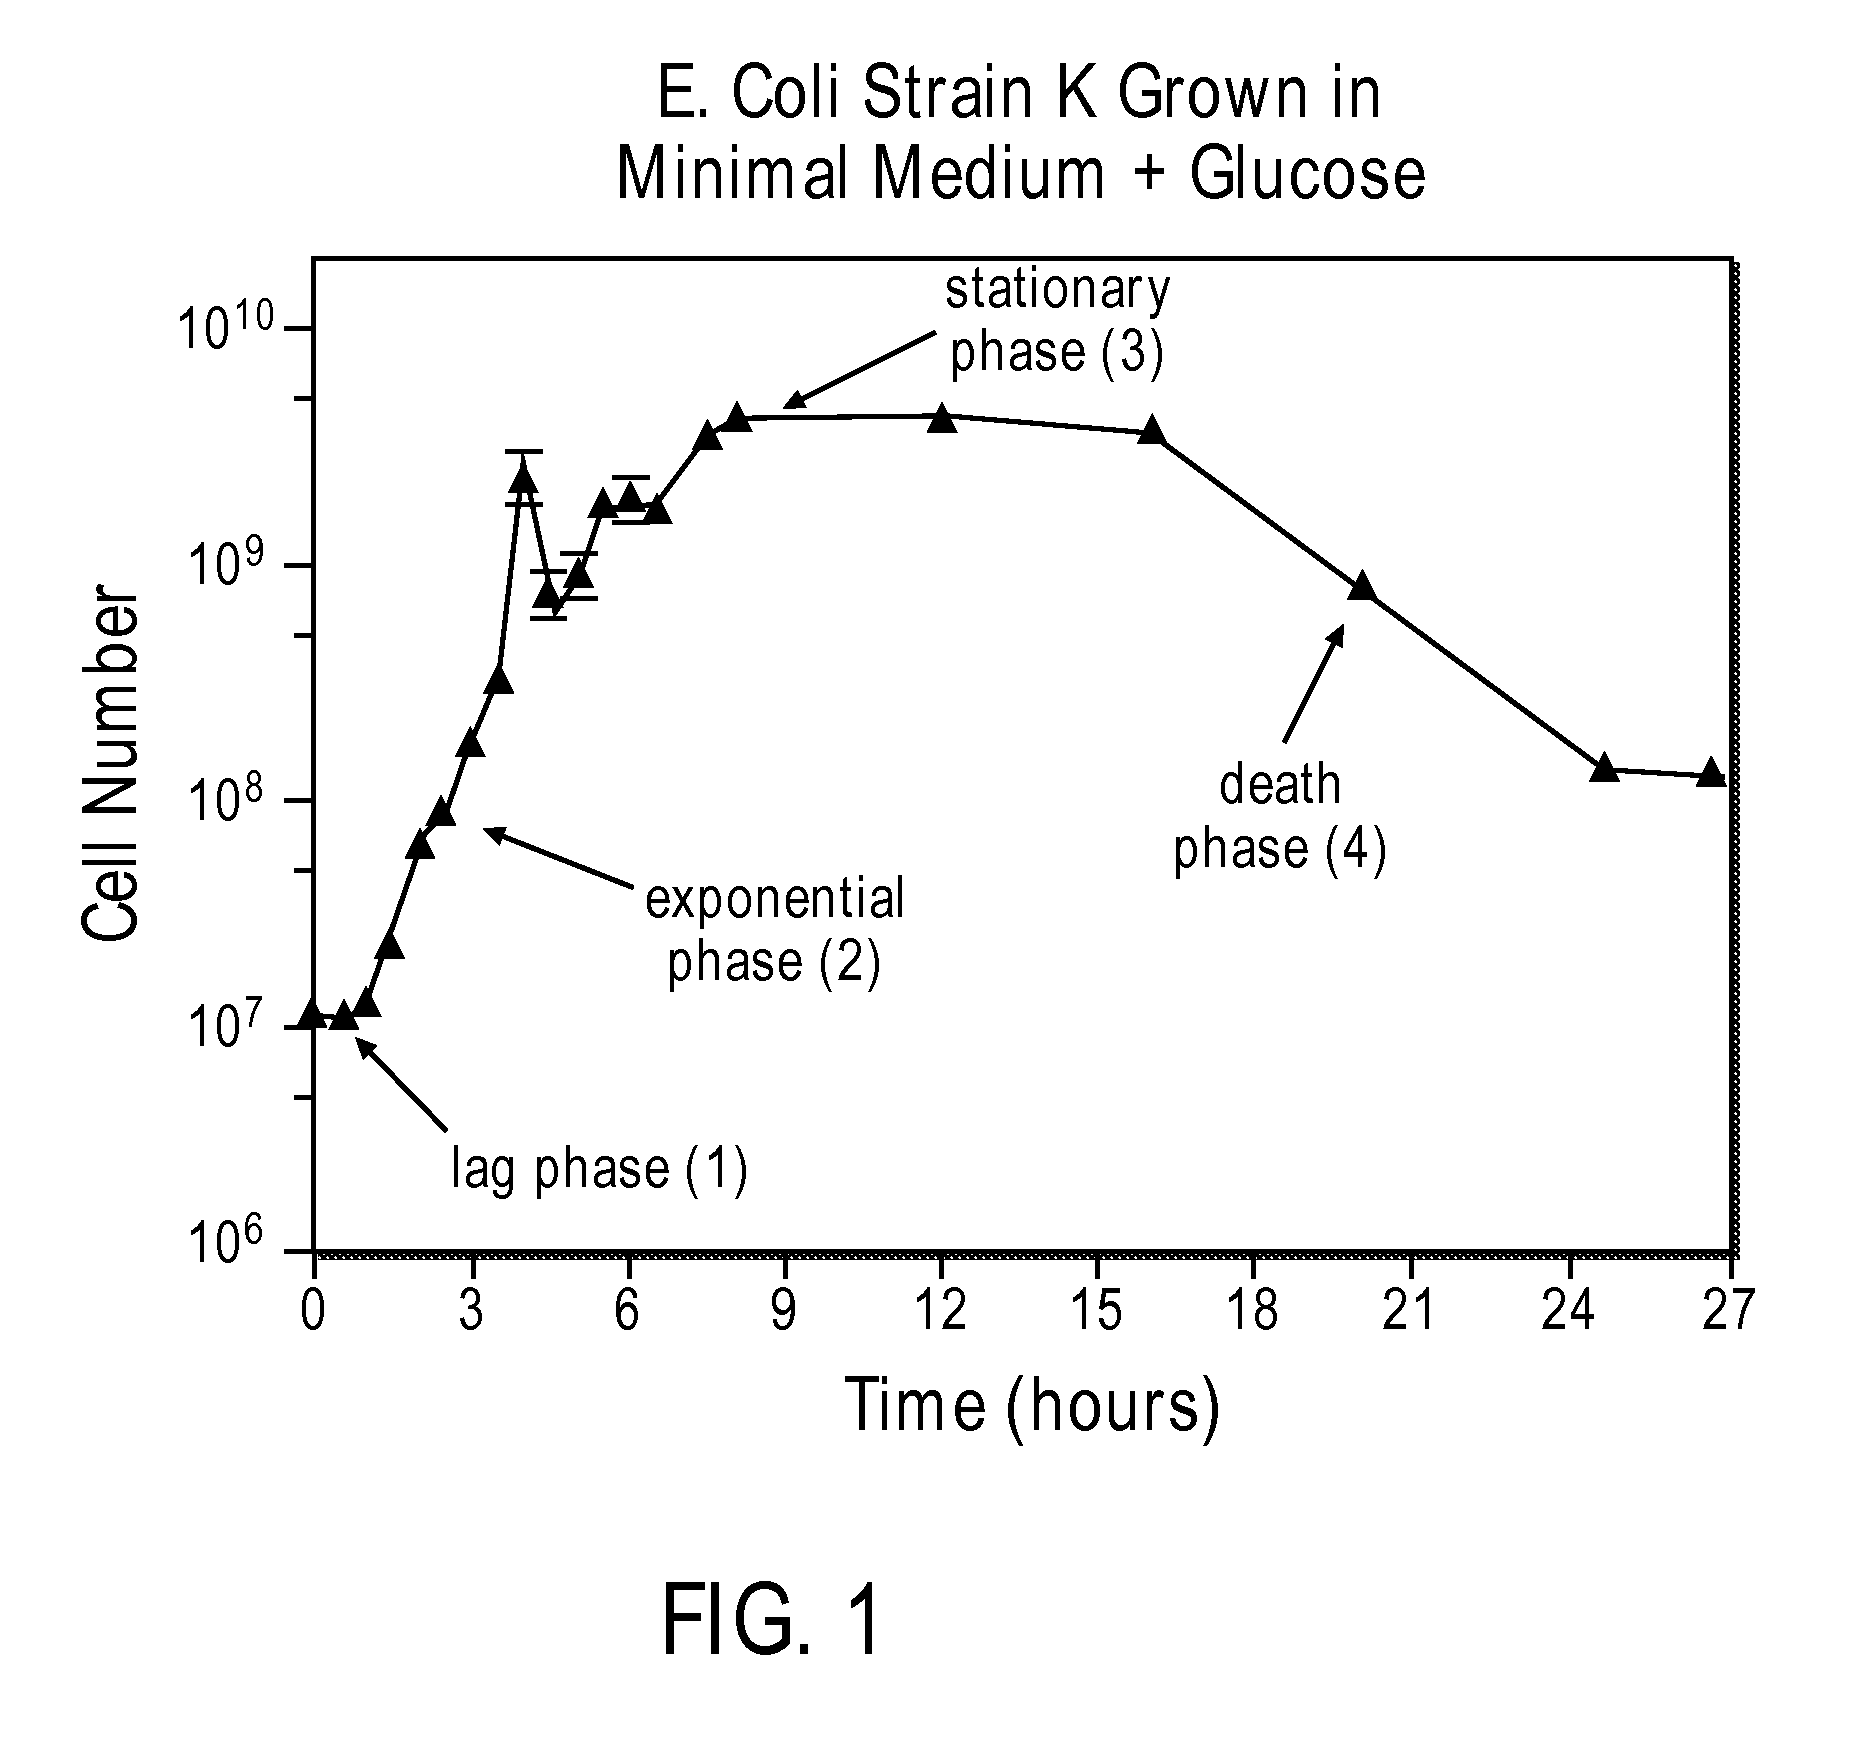 Systems and Methods for Large-Scale Production and Harvesting of Oil-Rich Algae